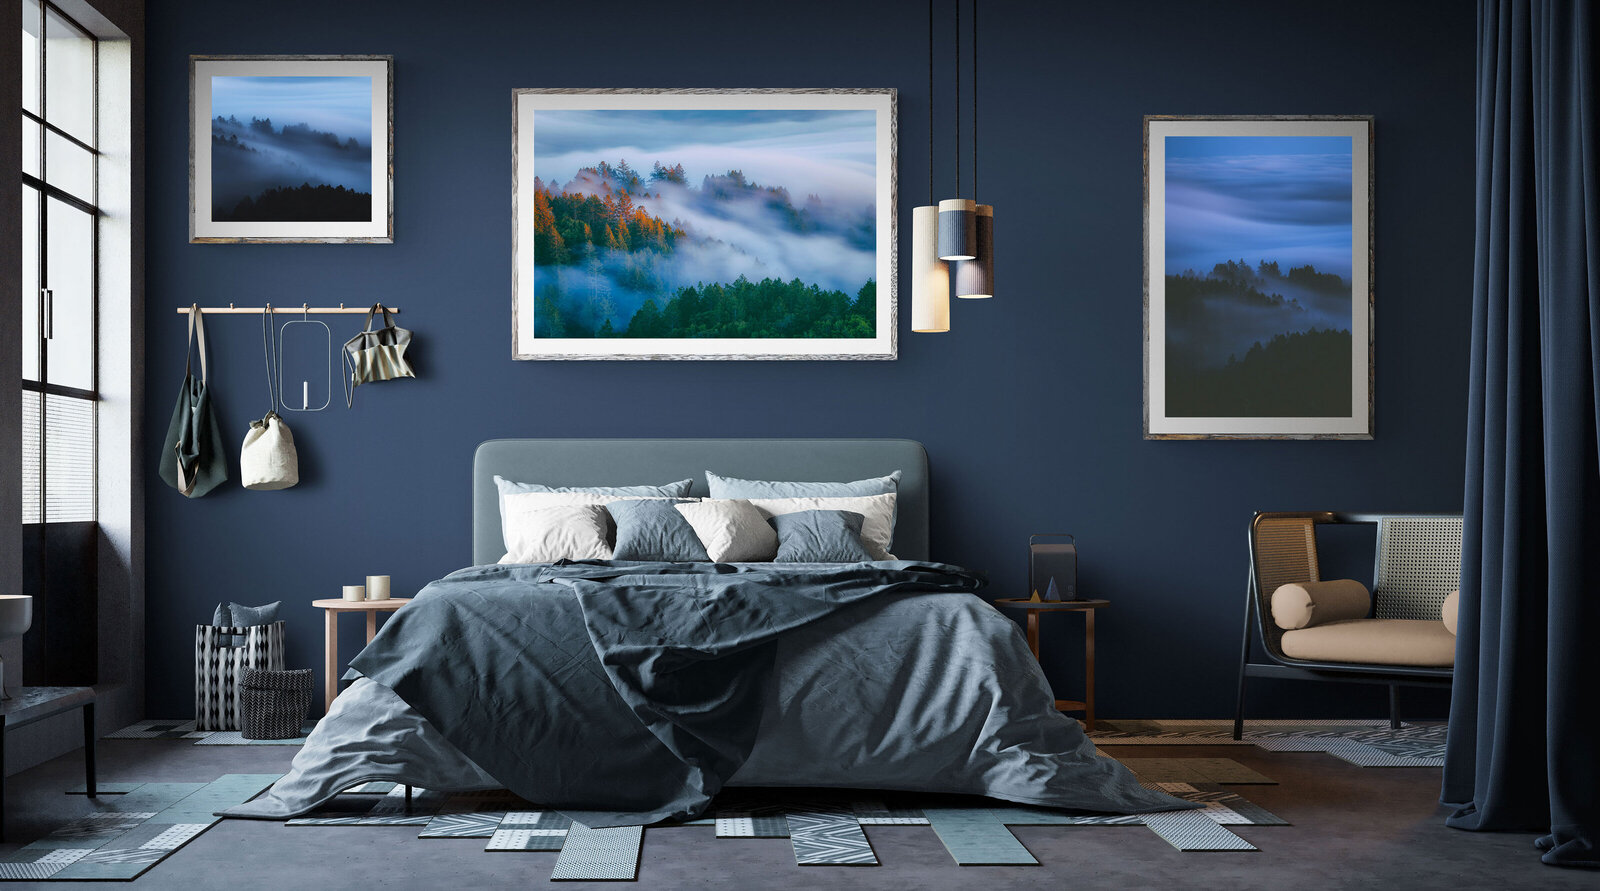 A product mockup of a bedroom to show  Seeking Venture Photo's fineart nature photography.